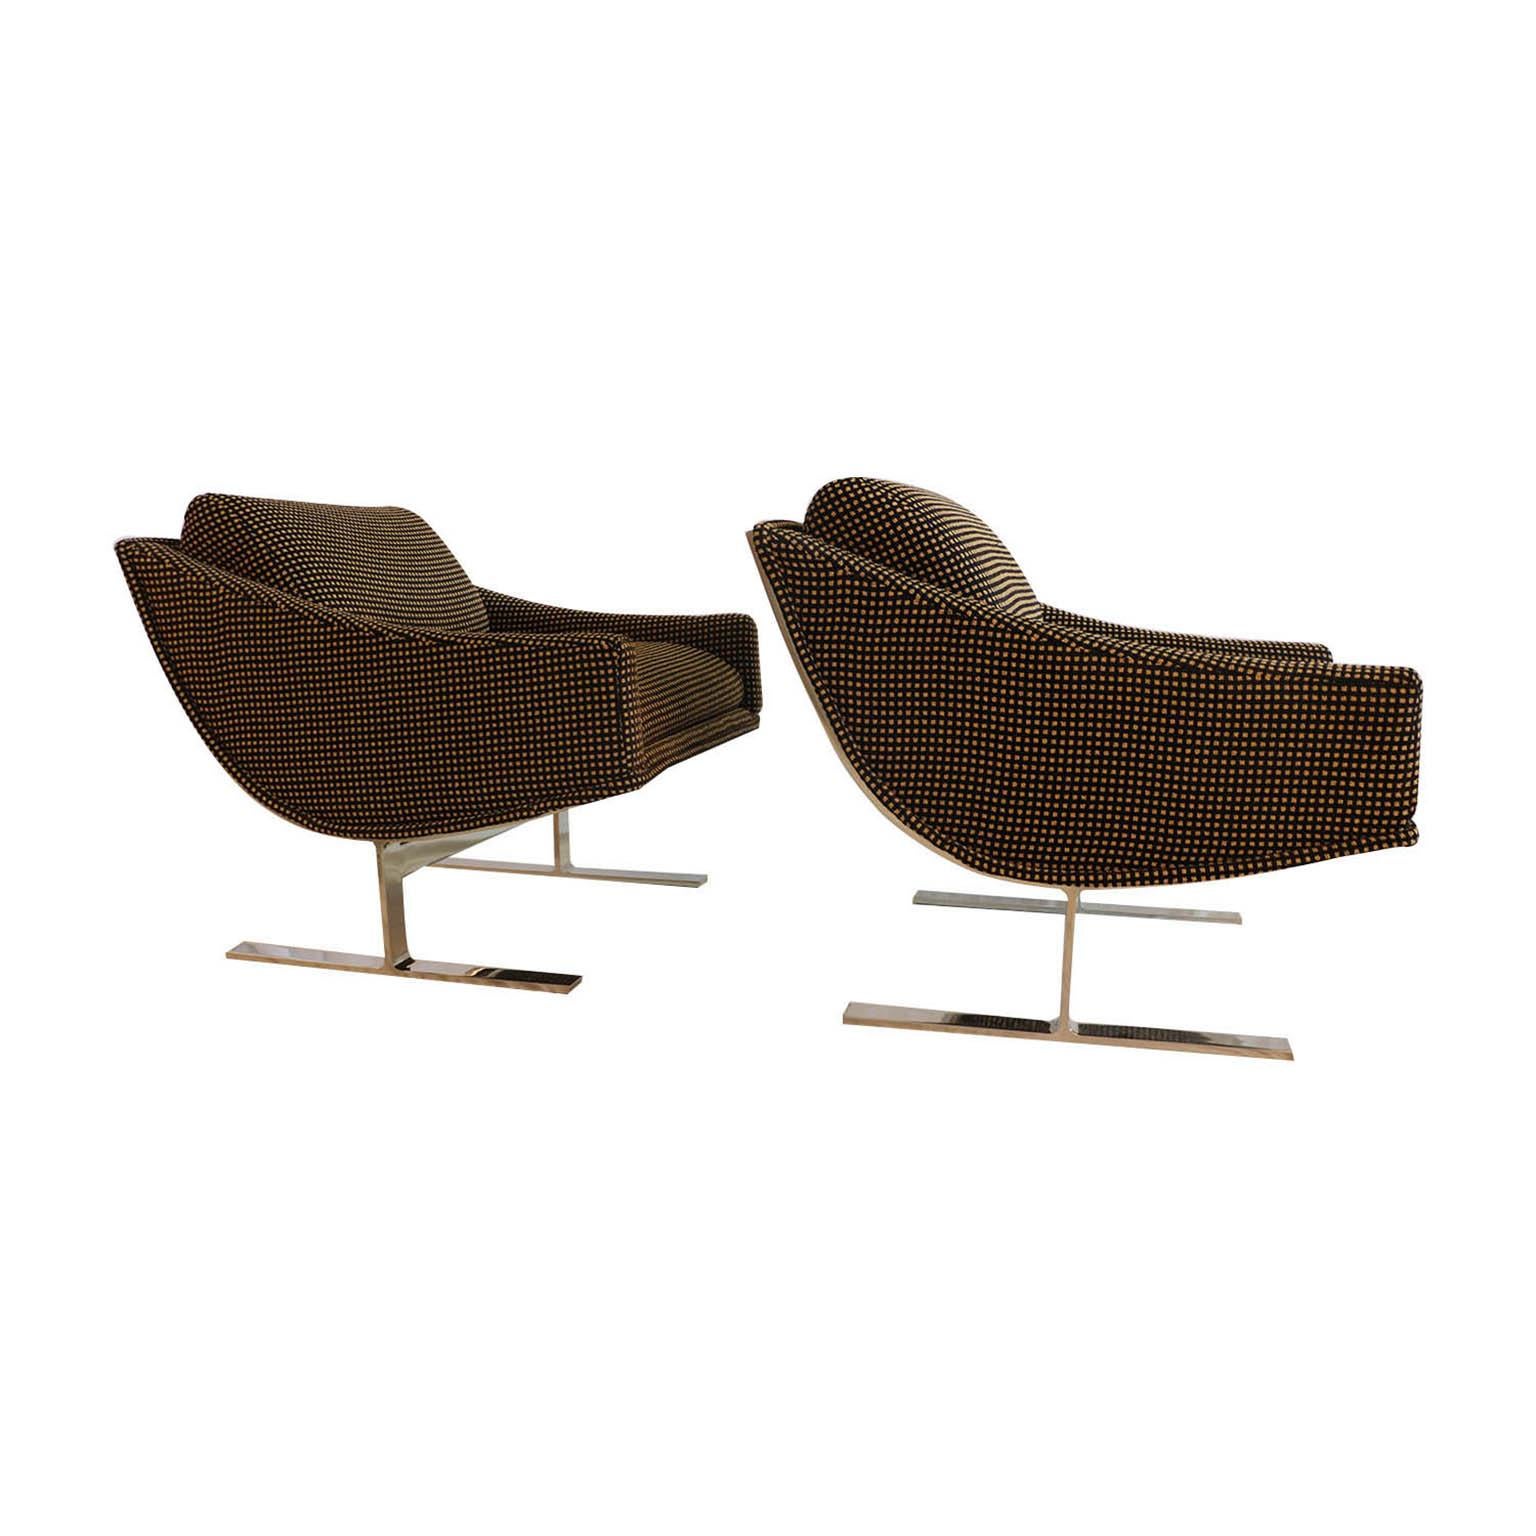 Midcentury Kipp Stewart “Arc Lounge Chairs” for Directional 2